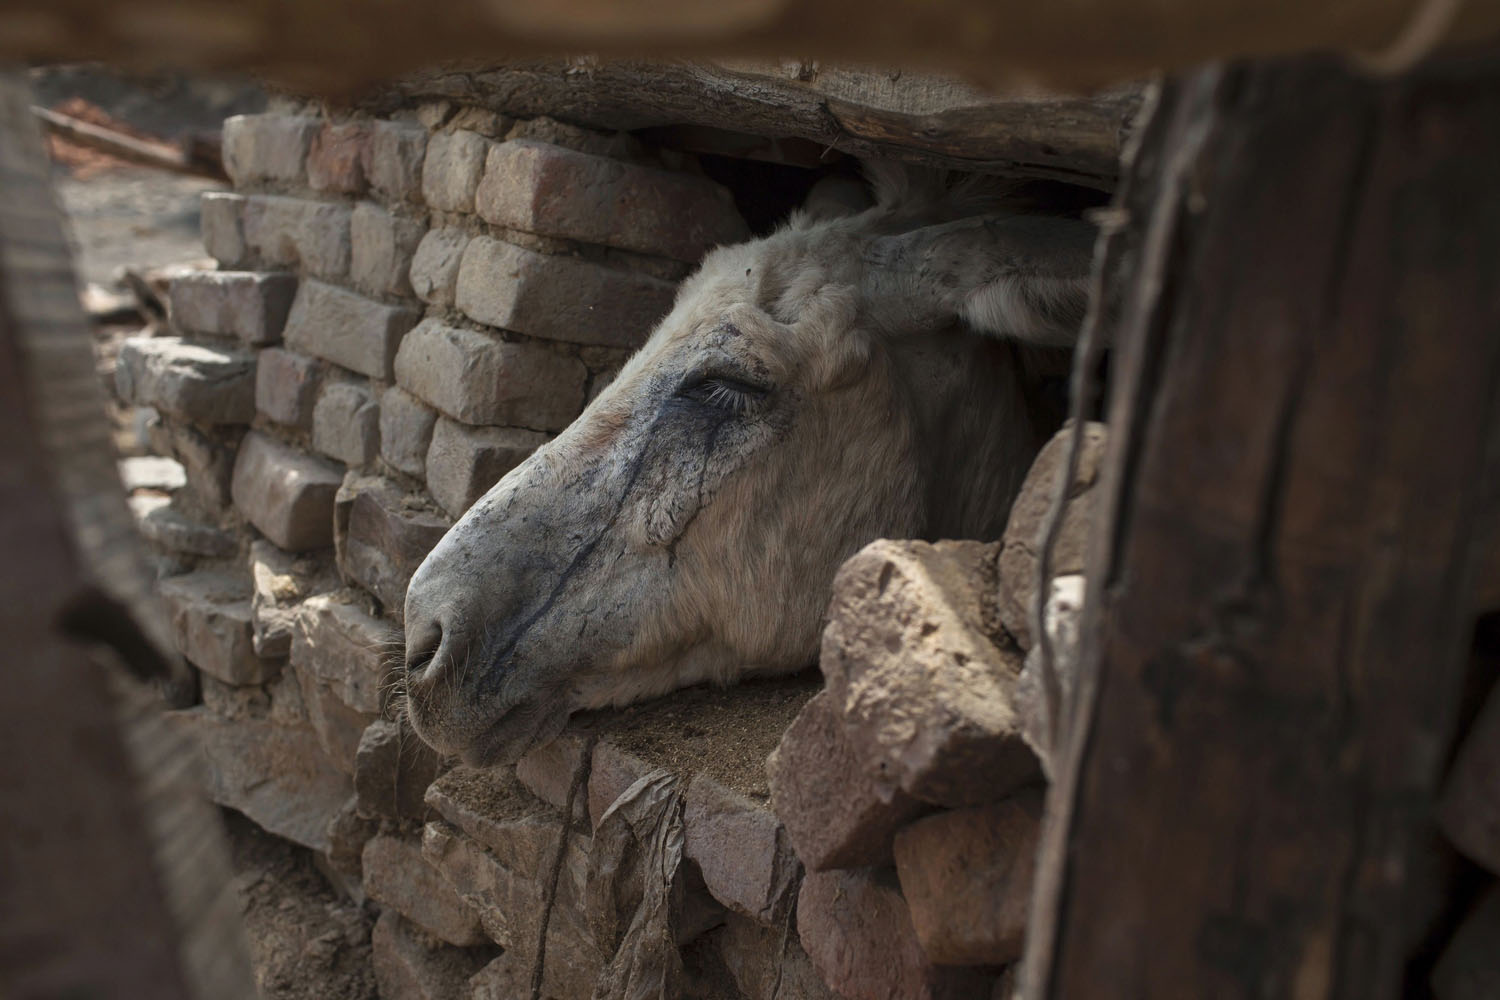 Tears of coal dust run down a donkey's face as it looks out of its shelter at a coal mine in Choa Saidan Shah in Punjab province on May 5, 2014.